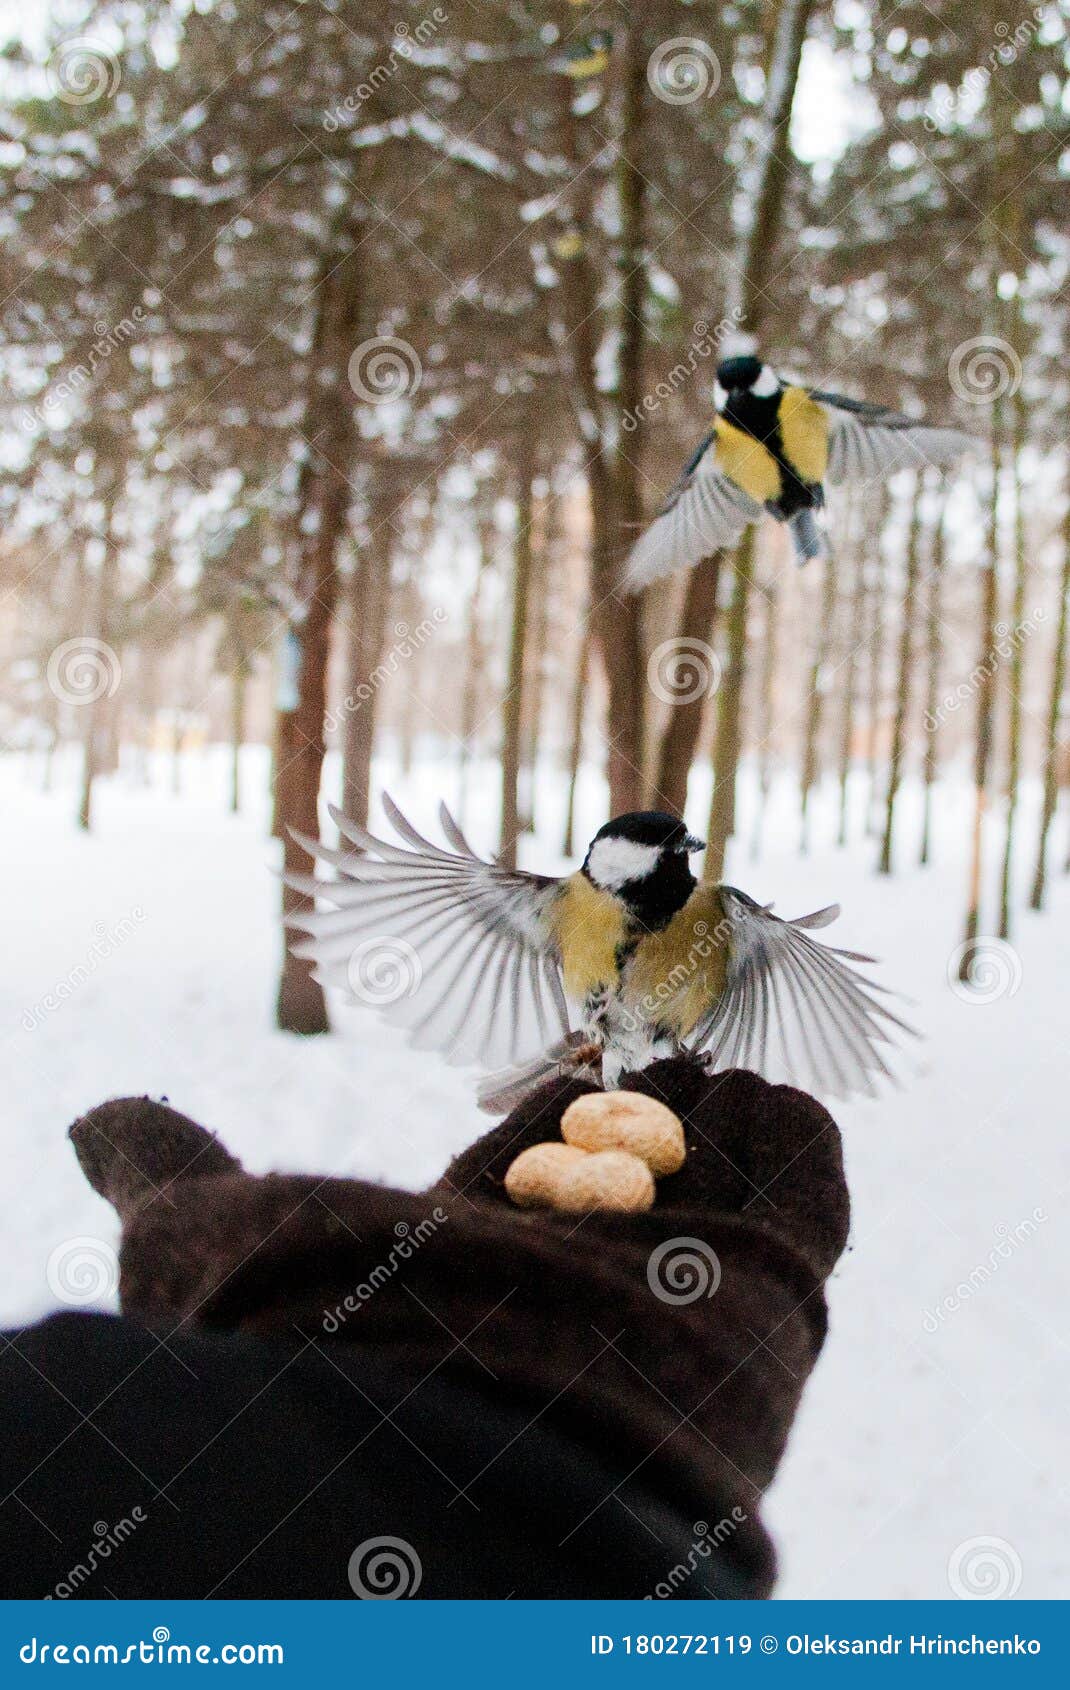 bird eats from the palm of a person